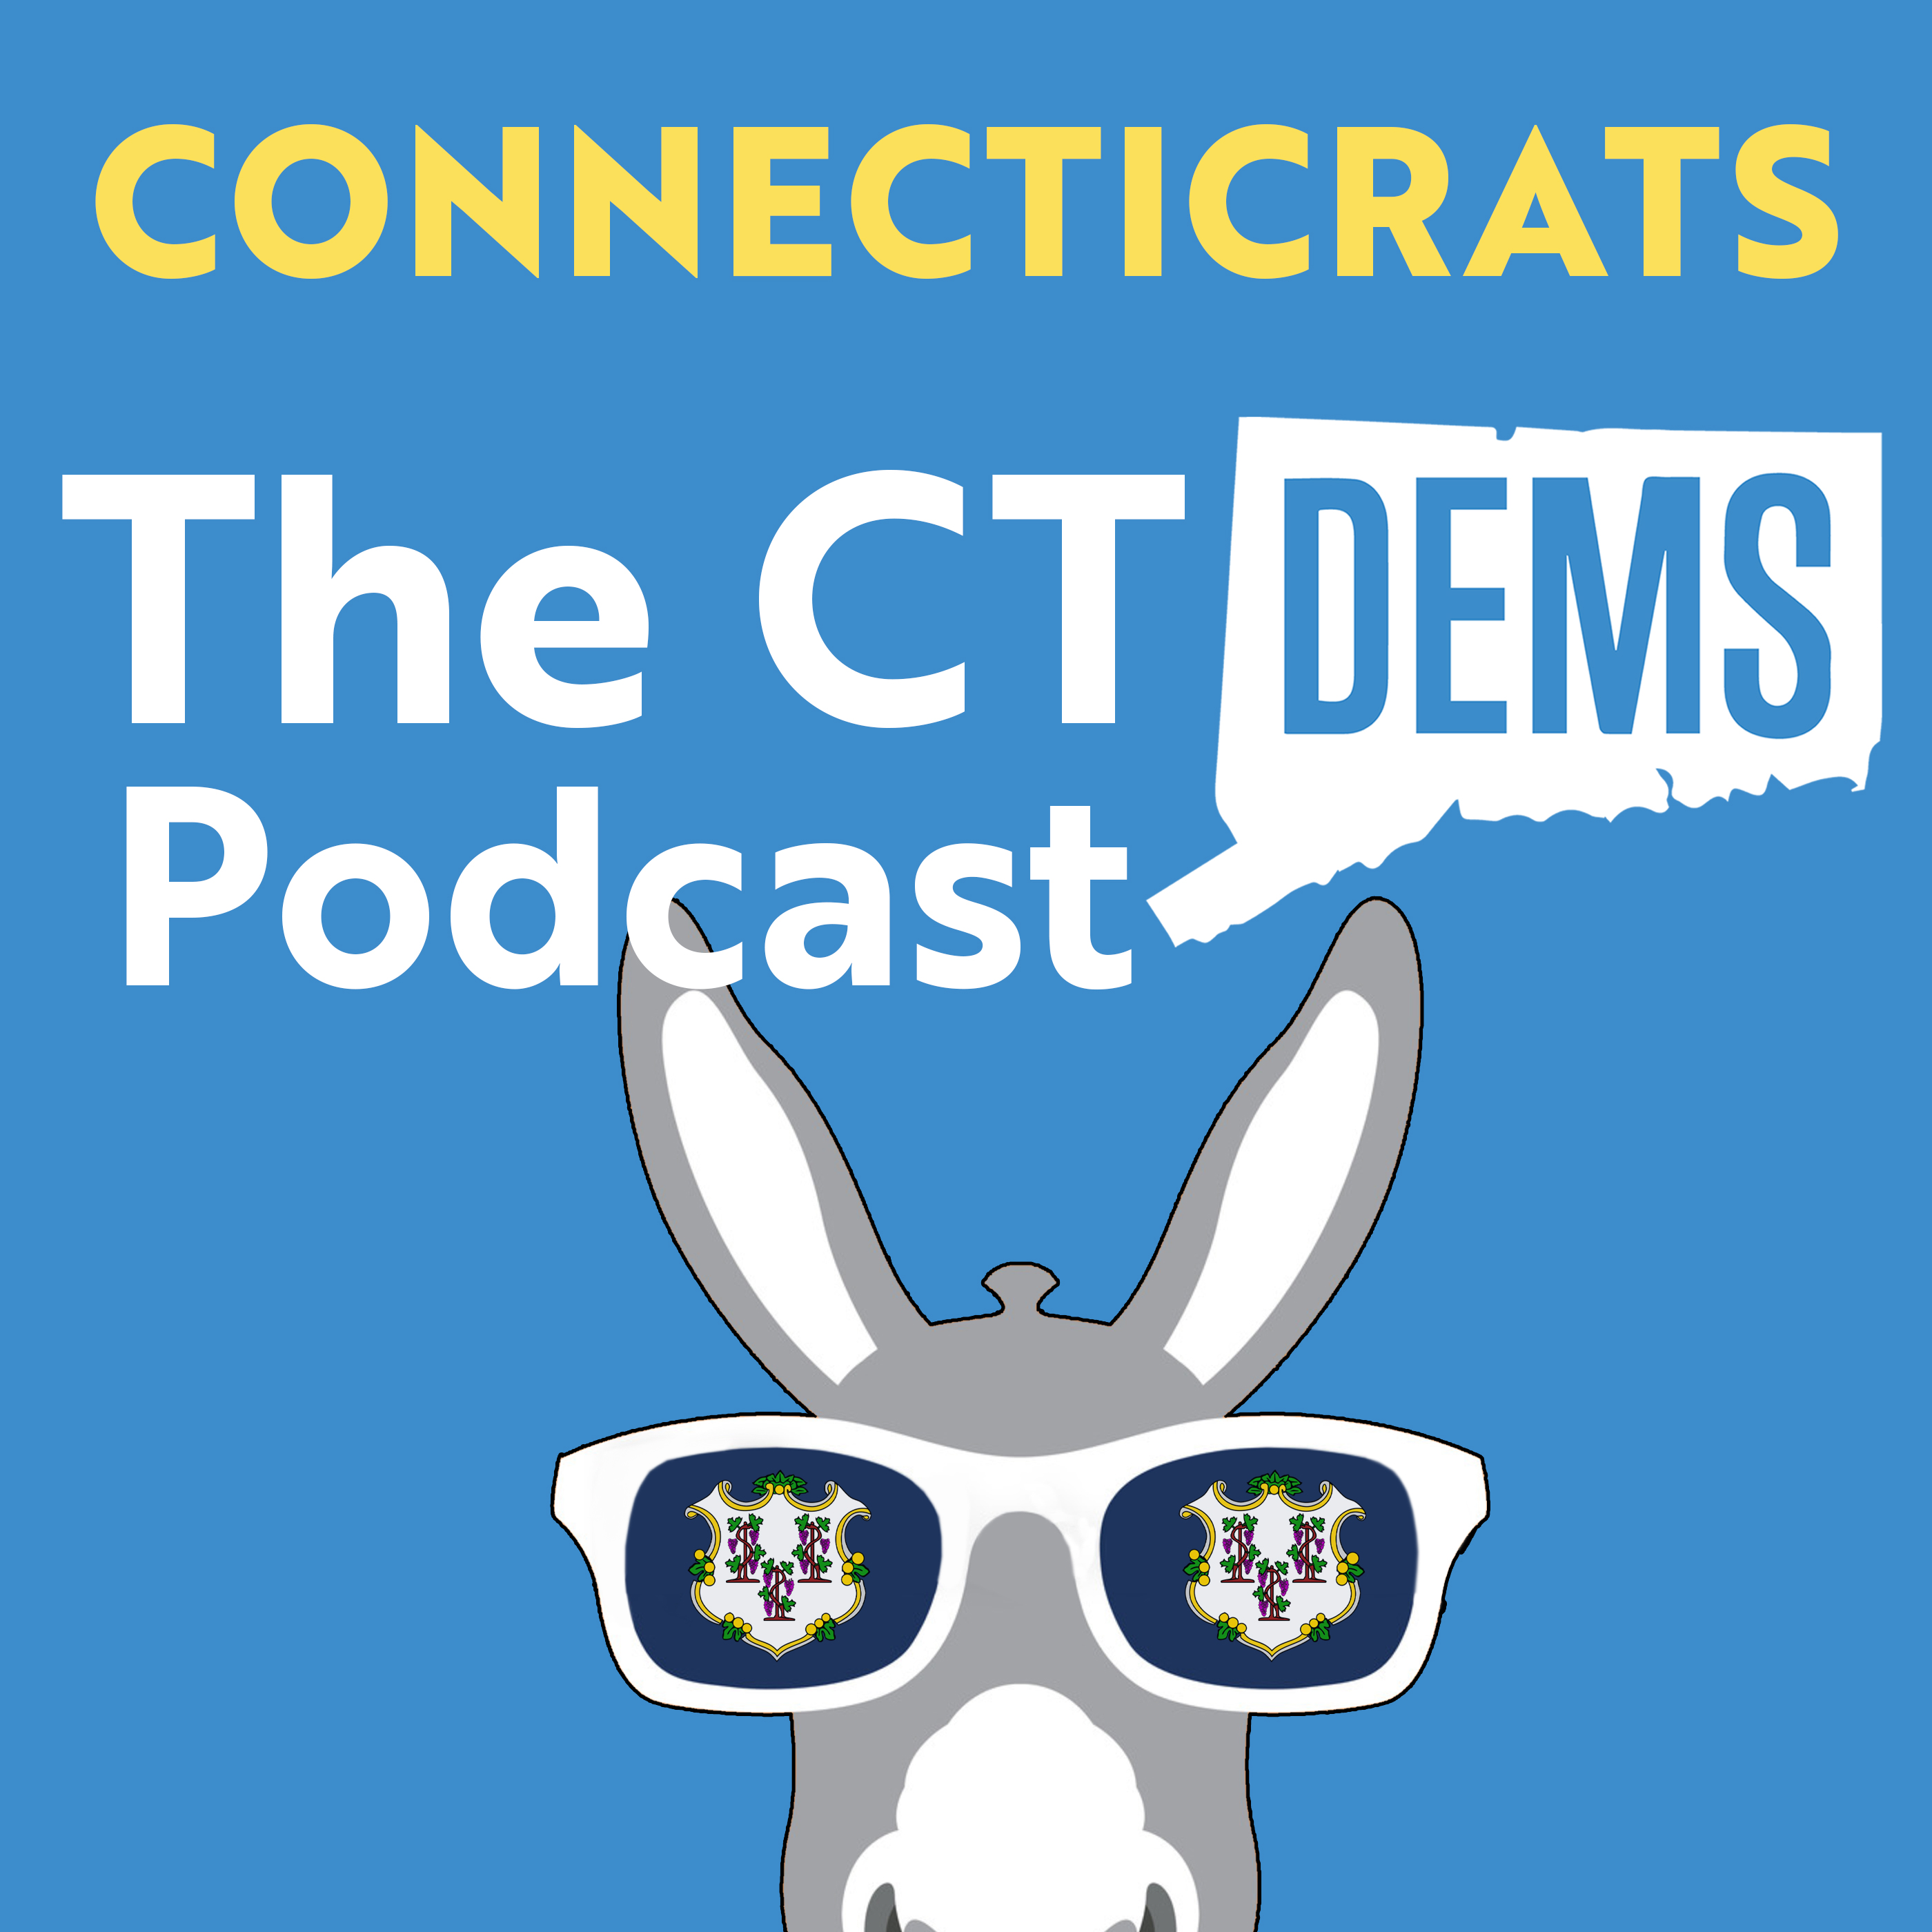 Connecticrats: The CT Dems Podcast